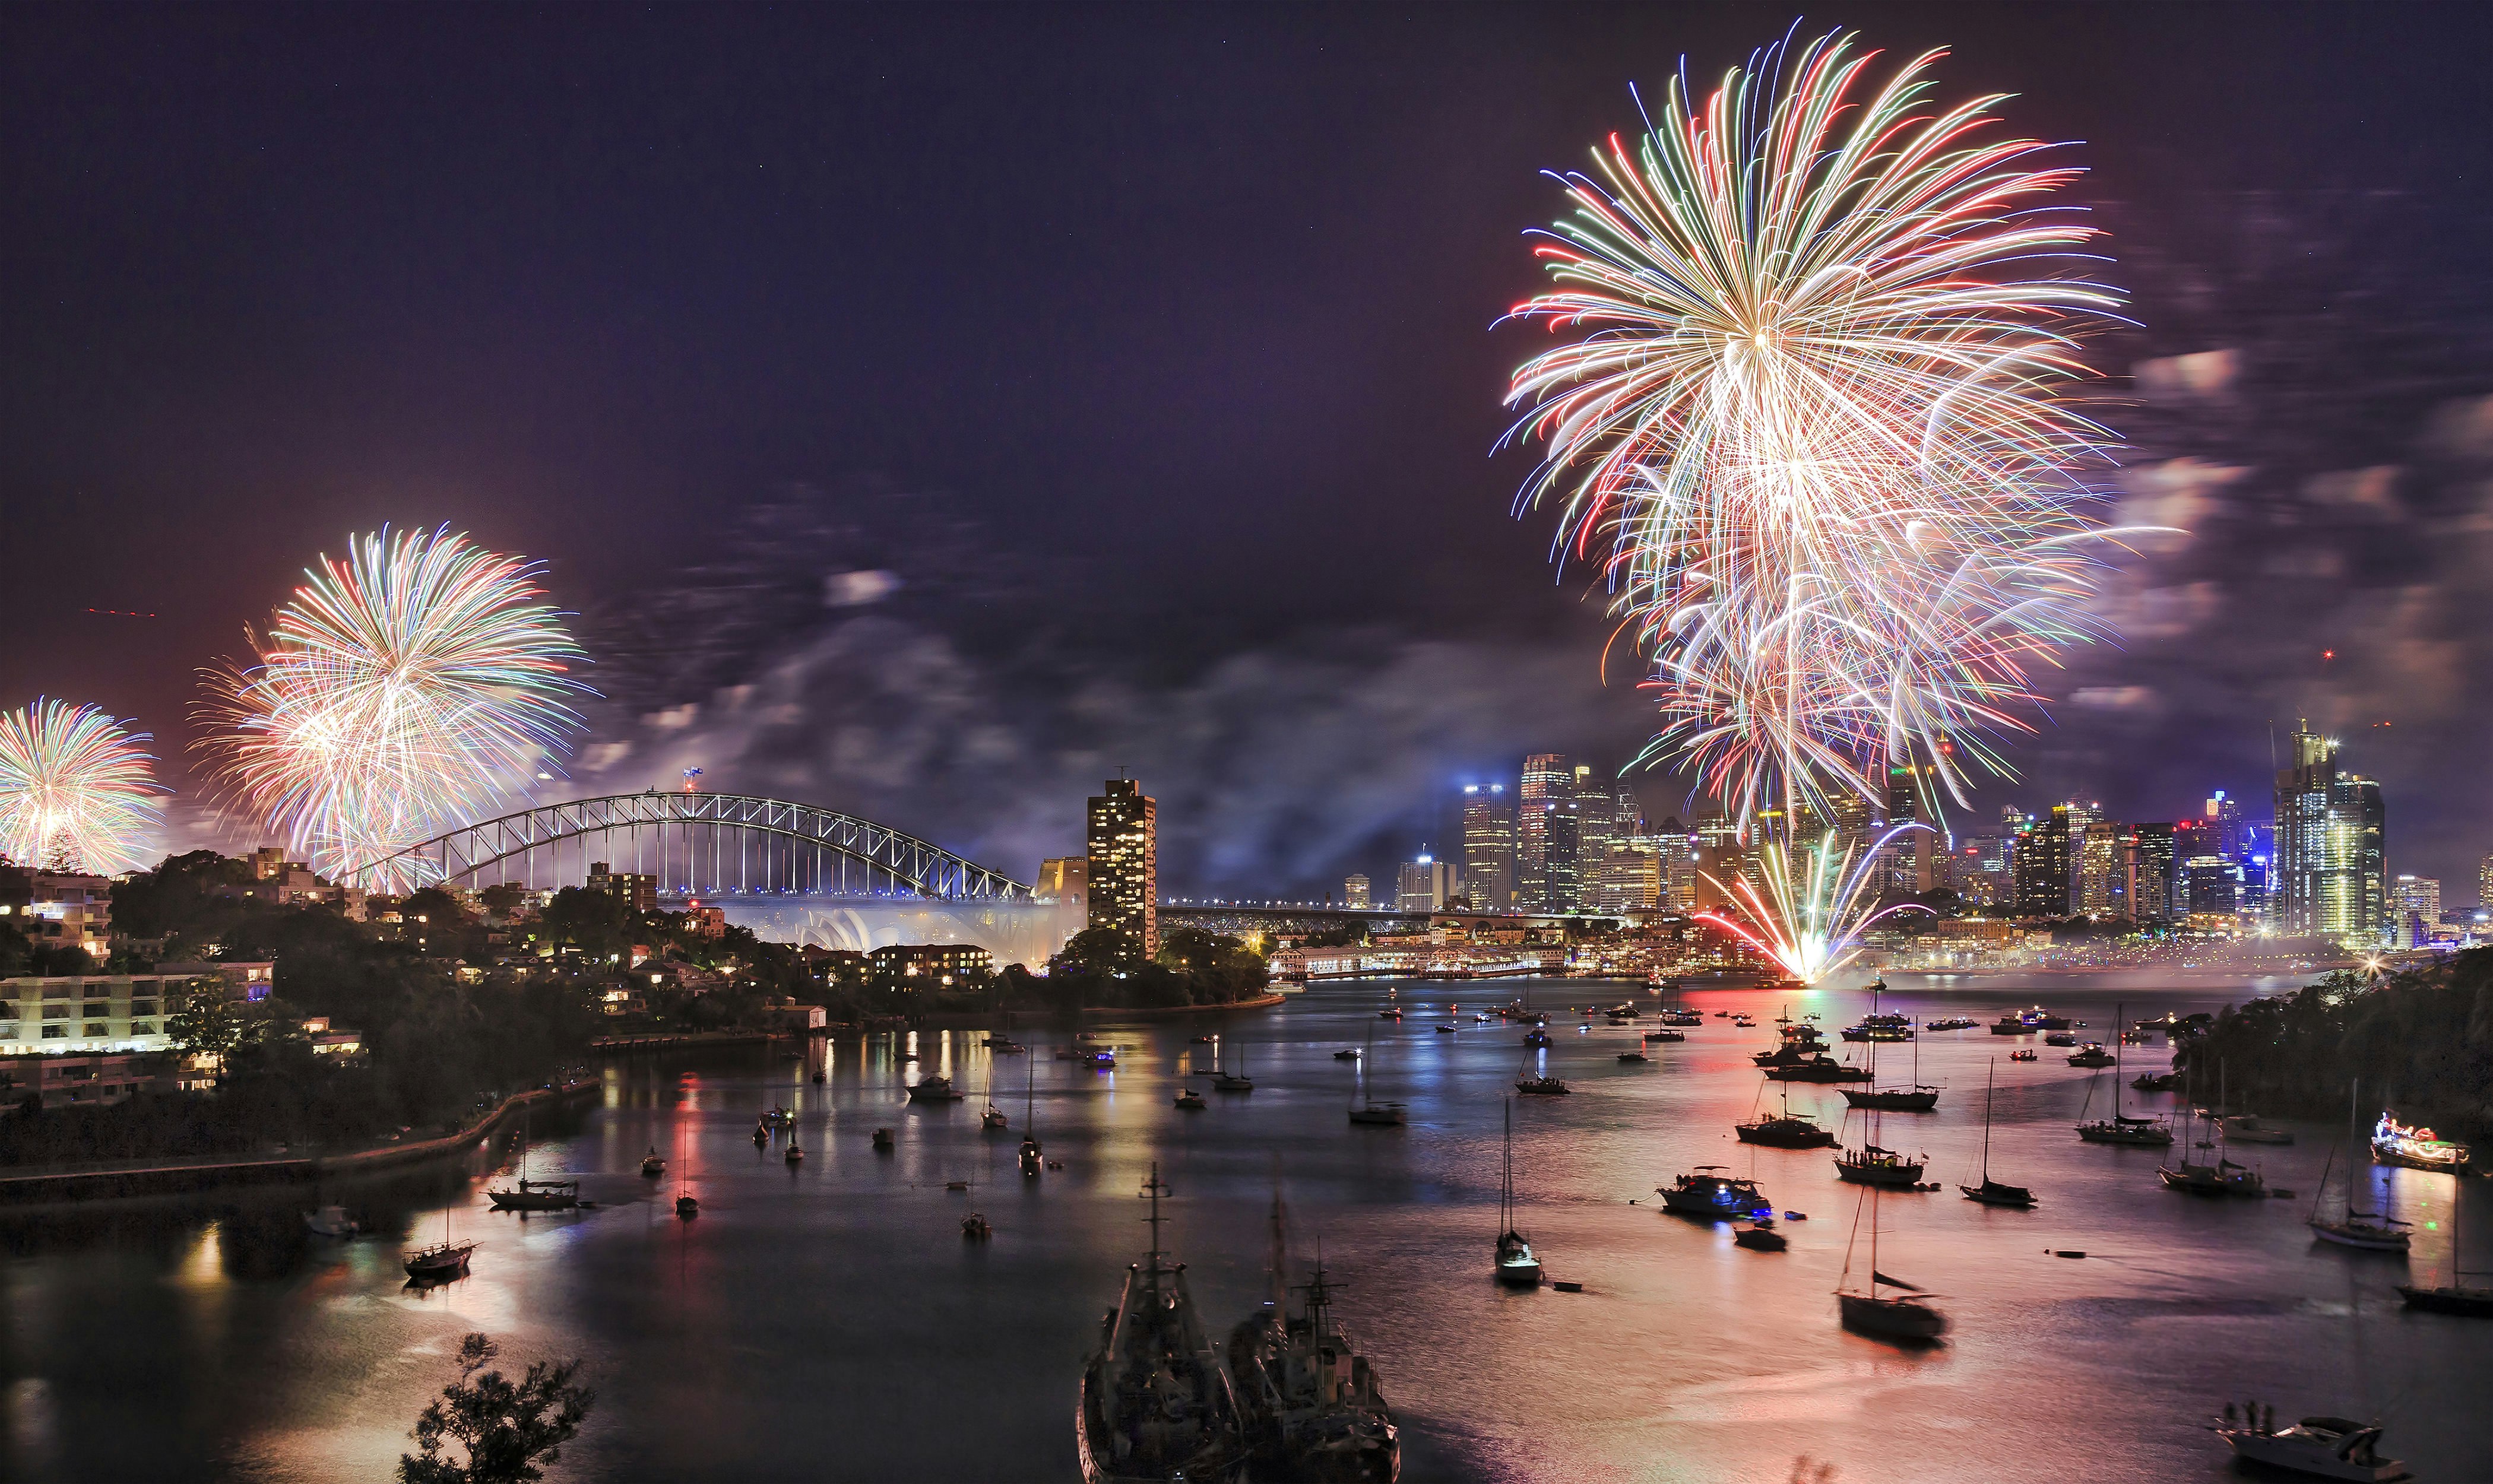 New Year's Eve fireworks explode over Sydney Harbour at night. The harbour is filled with boats, and the harbour bridge and buildings of the CBD can be seen beyond.